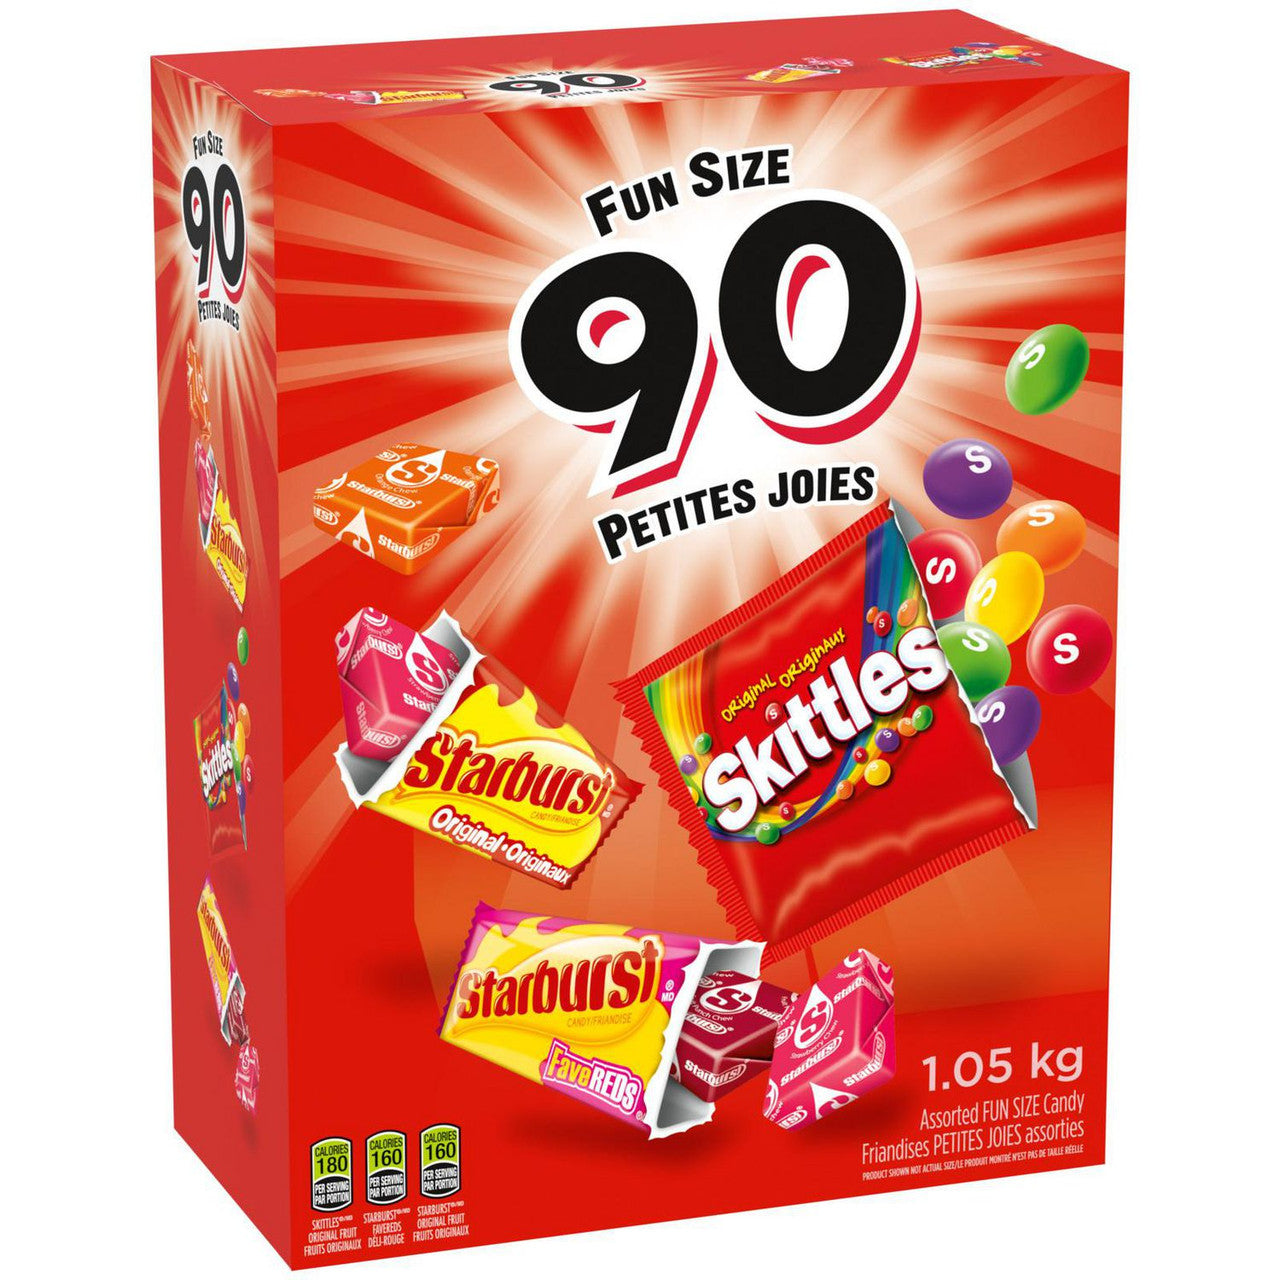 Skittles and Starburst Fun Size Candy Variety Pack, 90ct., 1.05kg/2.3 lbs., {Imported from Canada}